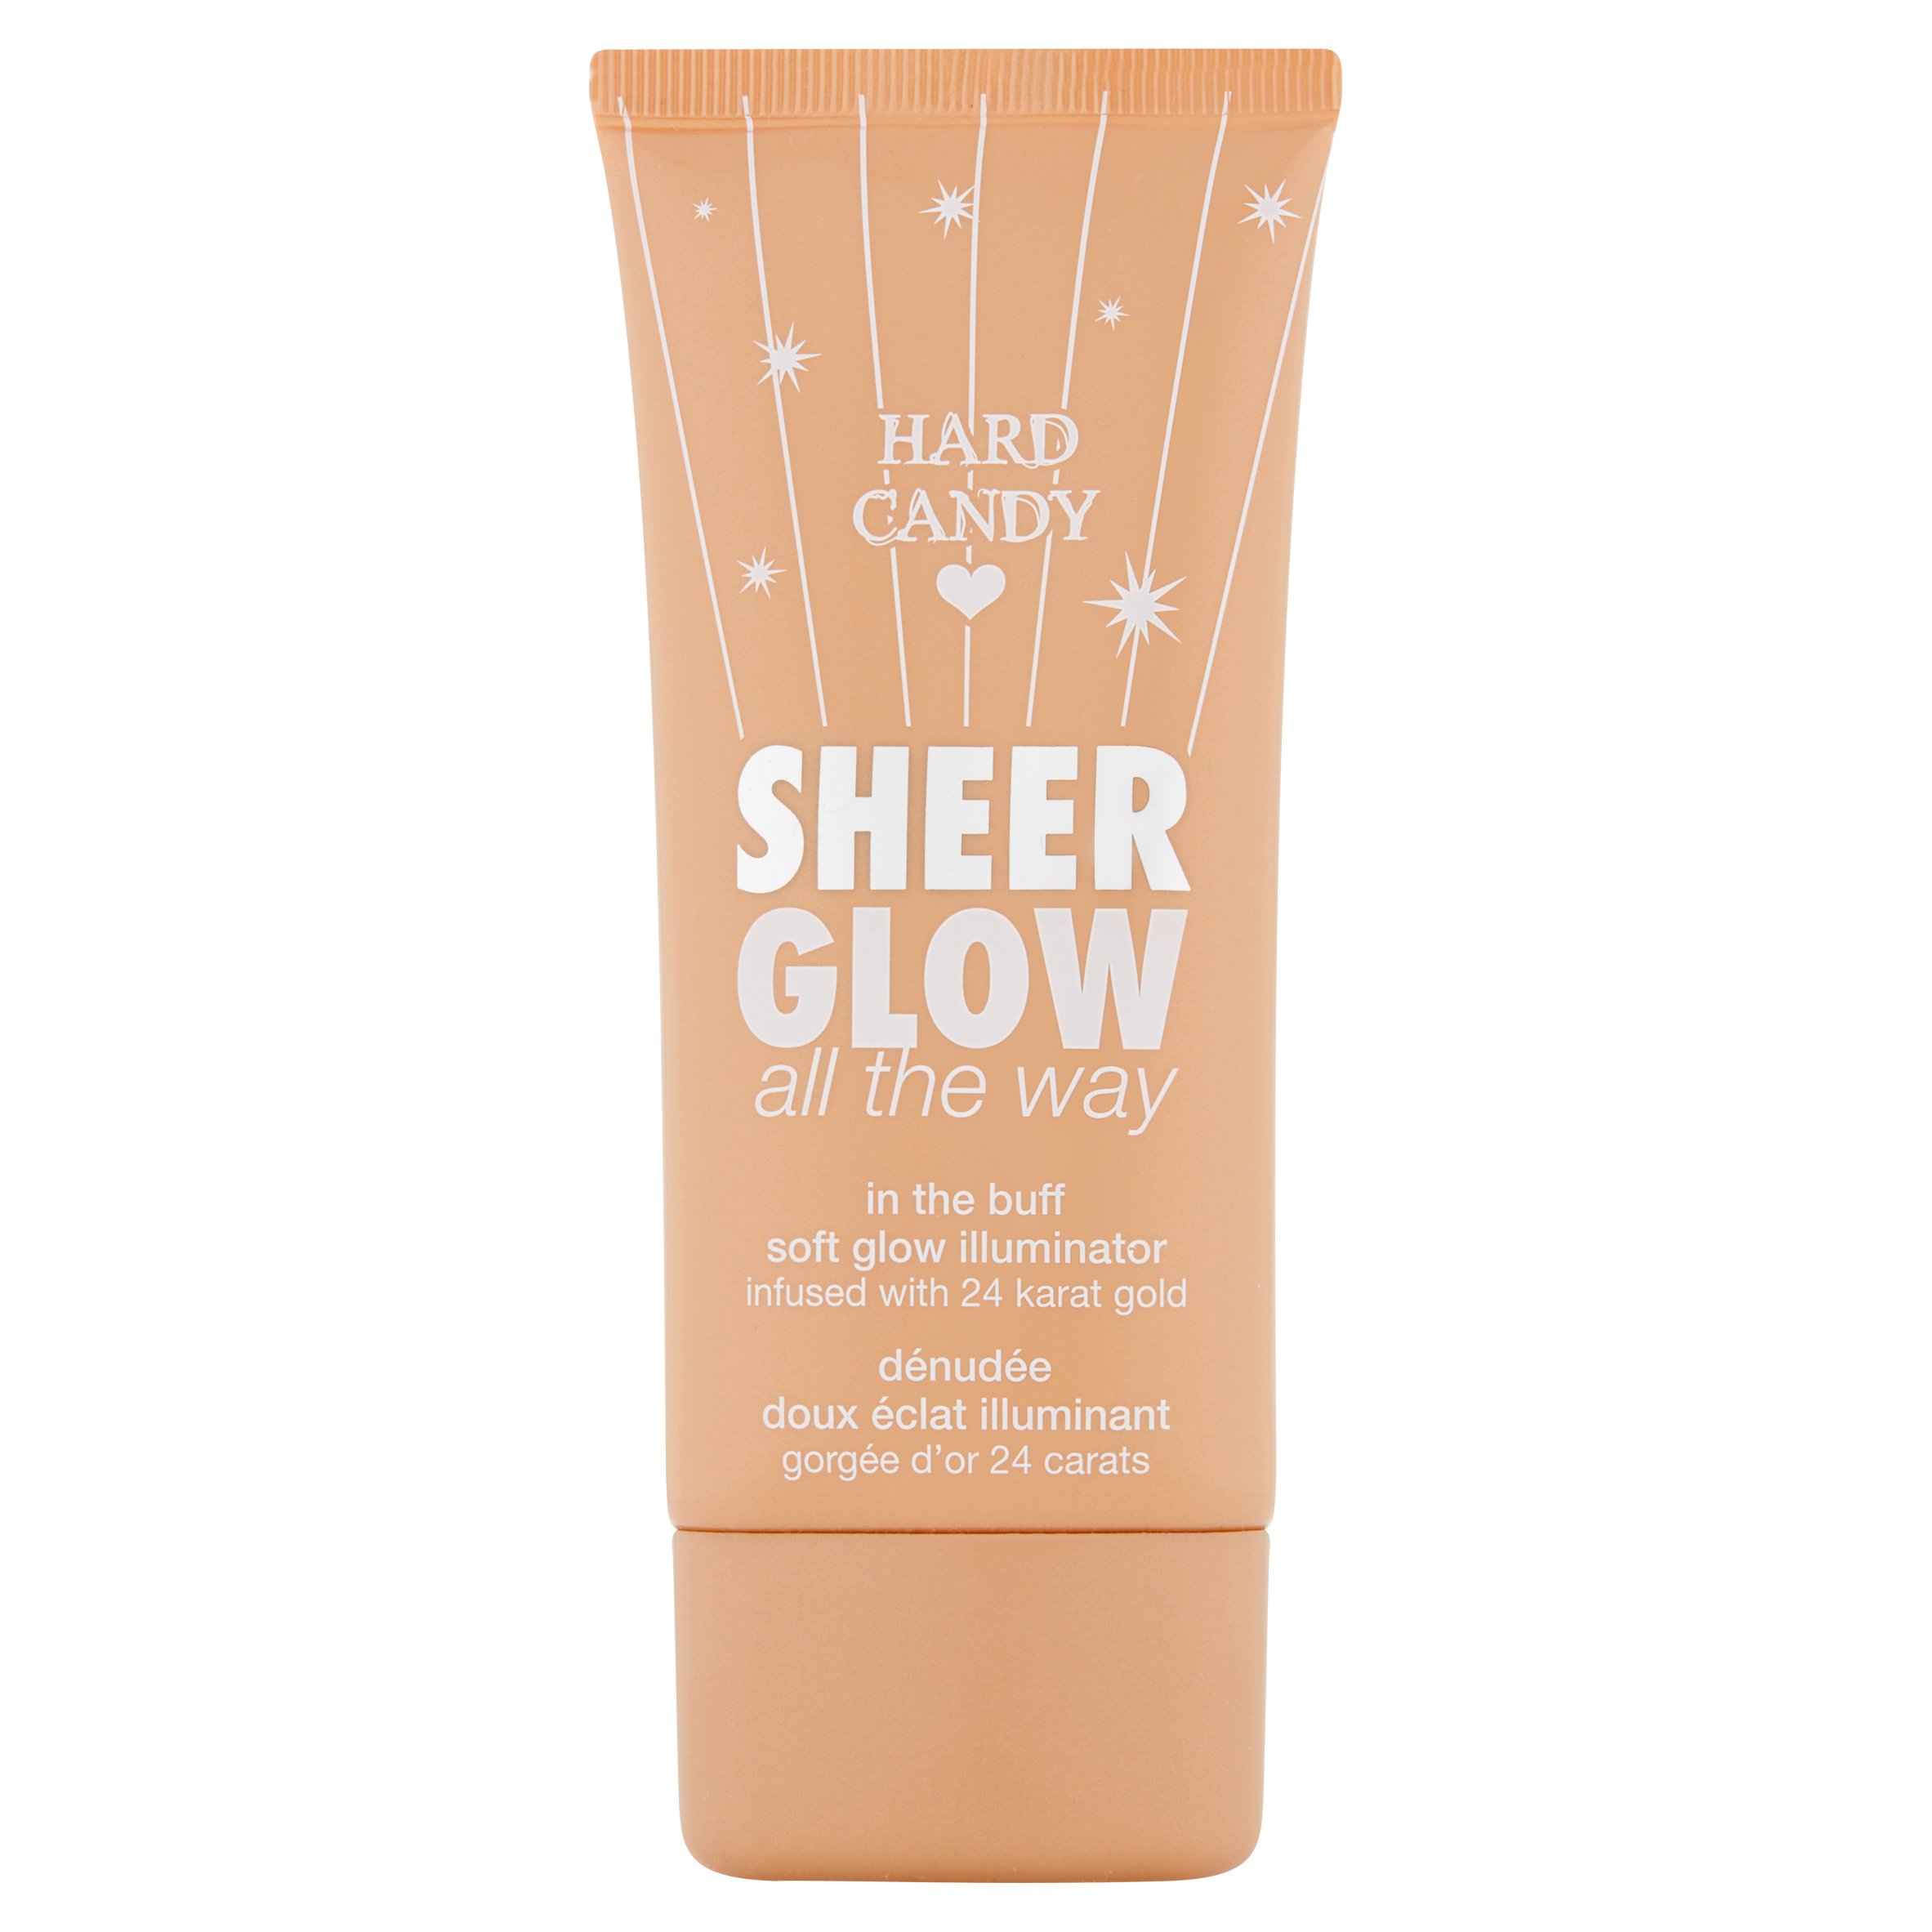 Hard Candy Sheer Glow all the way, 0842 In The Buff, 2.7 oz - image 1 of 4